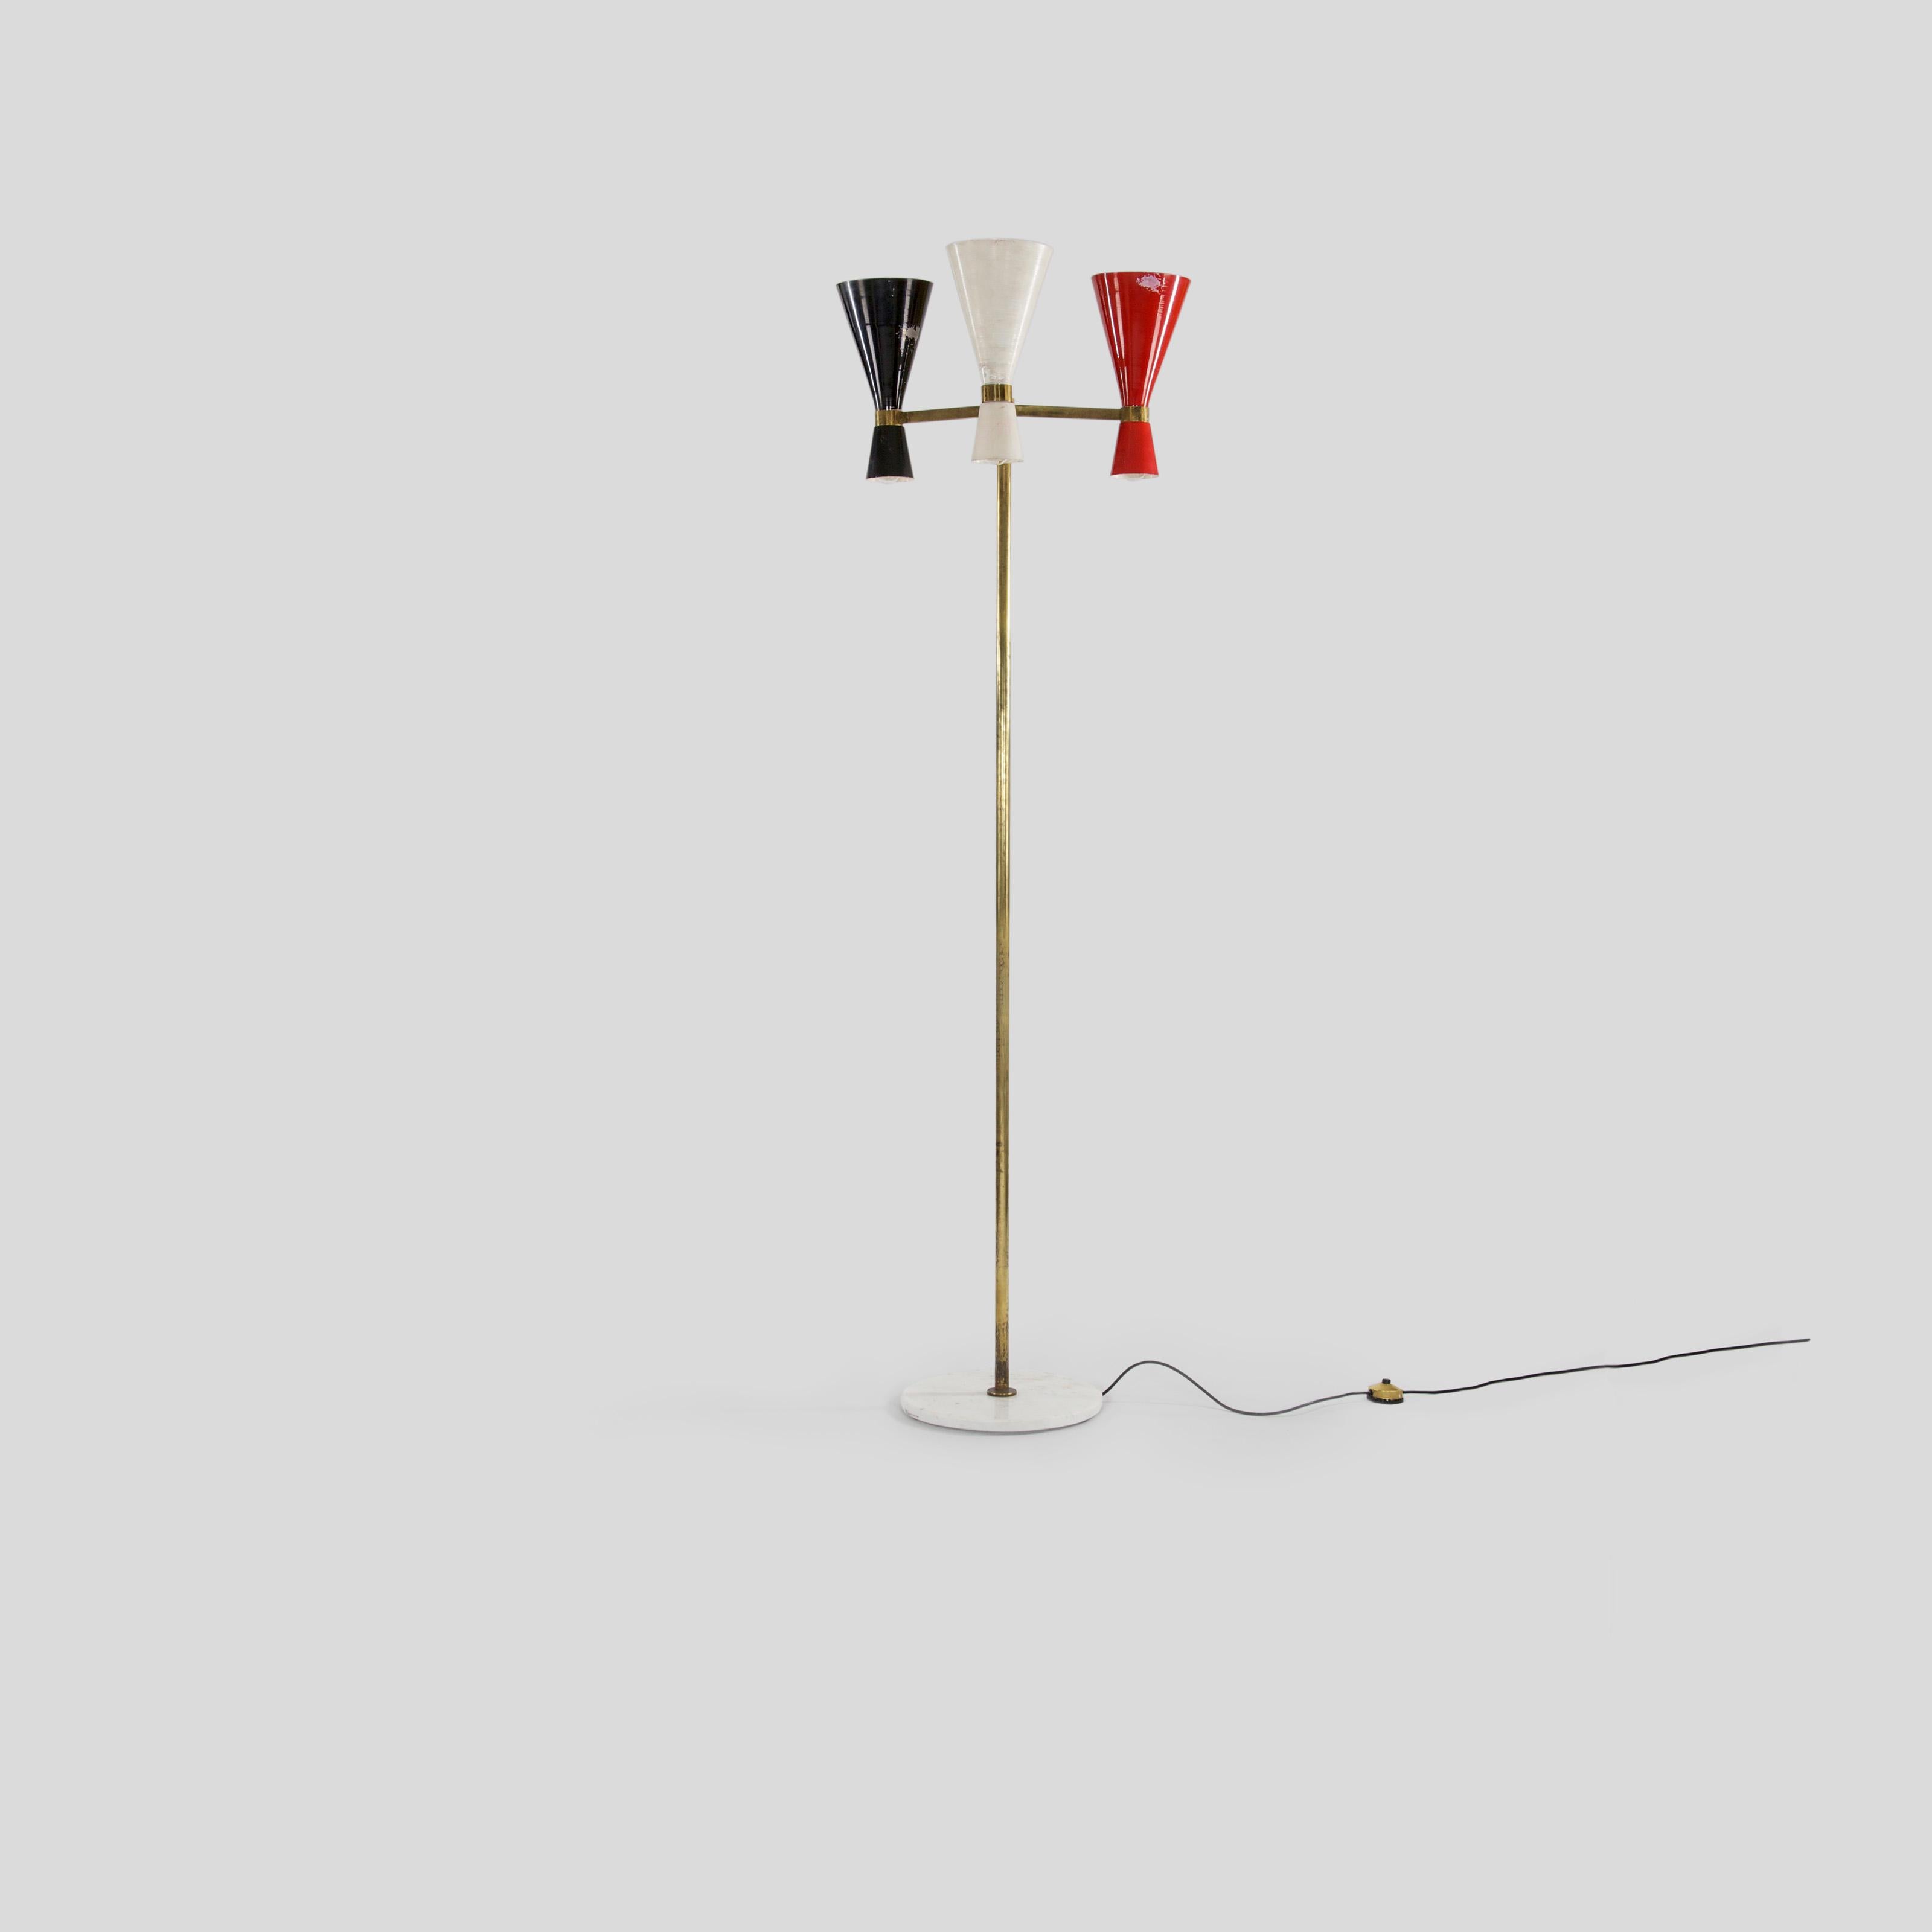 Mid-Century Modern Italian Floor Lamp with Red White Black Colored Metal Shades, Marble Base, 1950s For Sale